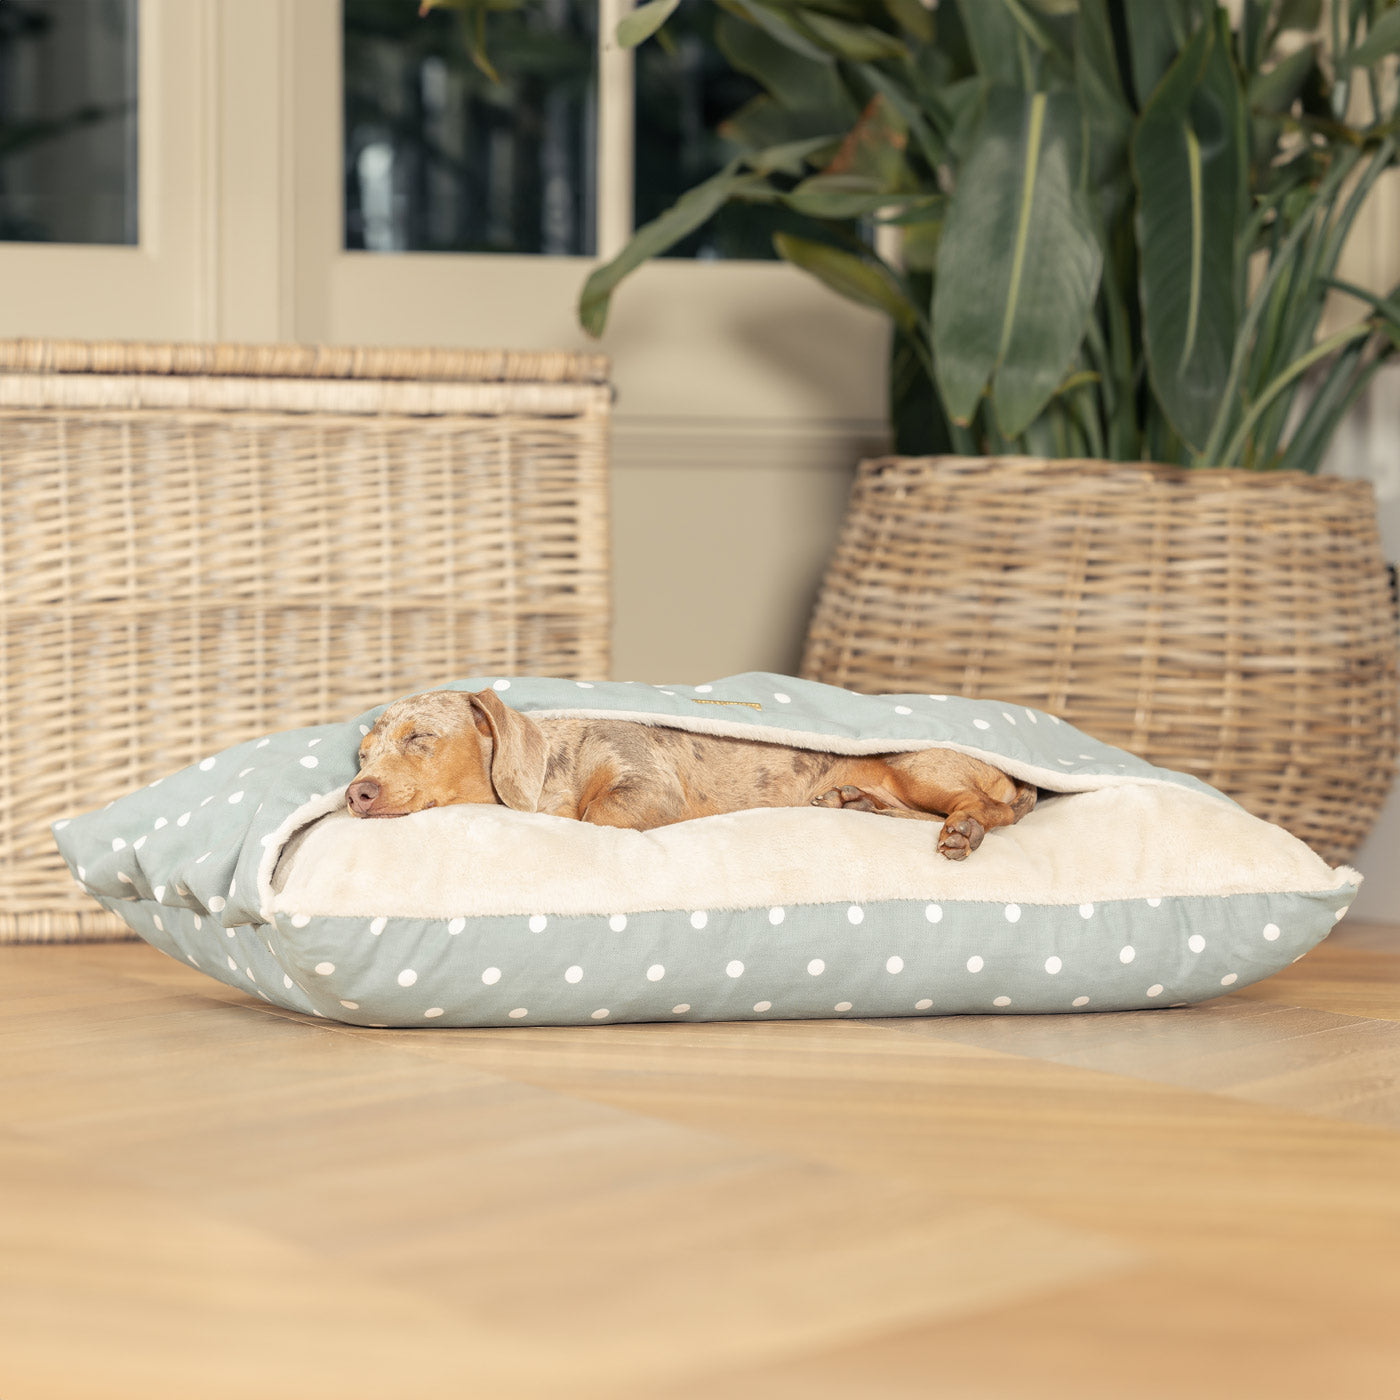  Discover The Perfect Burrow For Your Pet, Our Stunning Sleepy Burrow Dog Beds In Duck Egg Spot Is The Perfect Bed Choice For Your Pet, Available Now at Lords & Labradors US